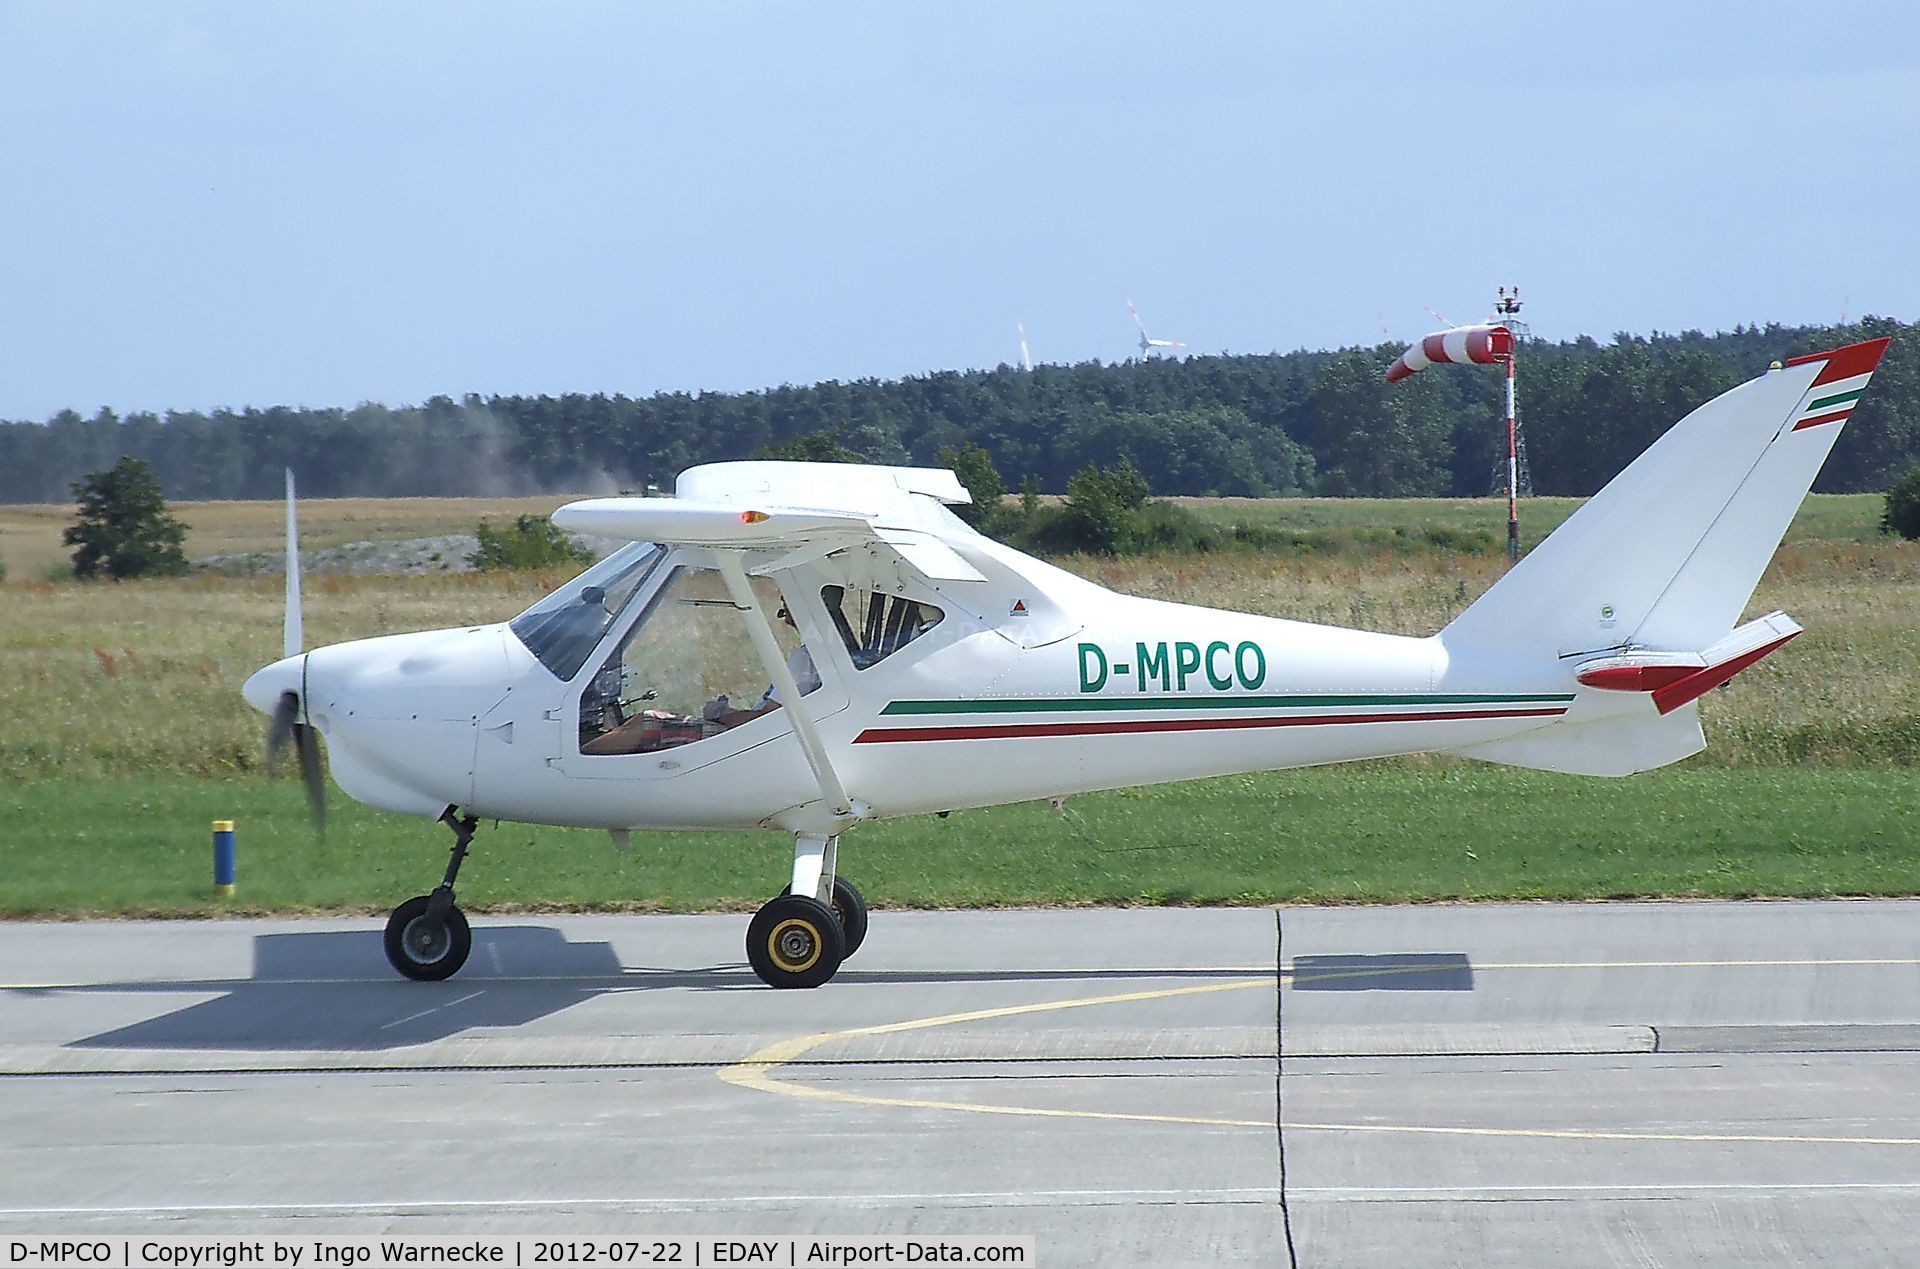 D-MPCO, Flyitalia MD-3 Rider C/N Not found D-MPCO, Flyitalia MD-3 Rider at Strausberg airfield